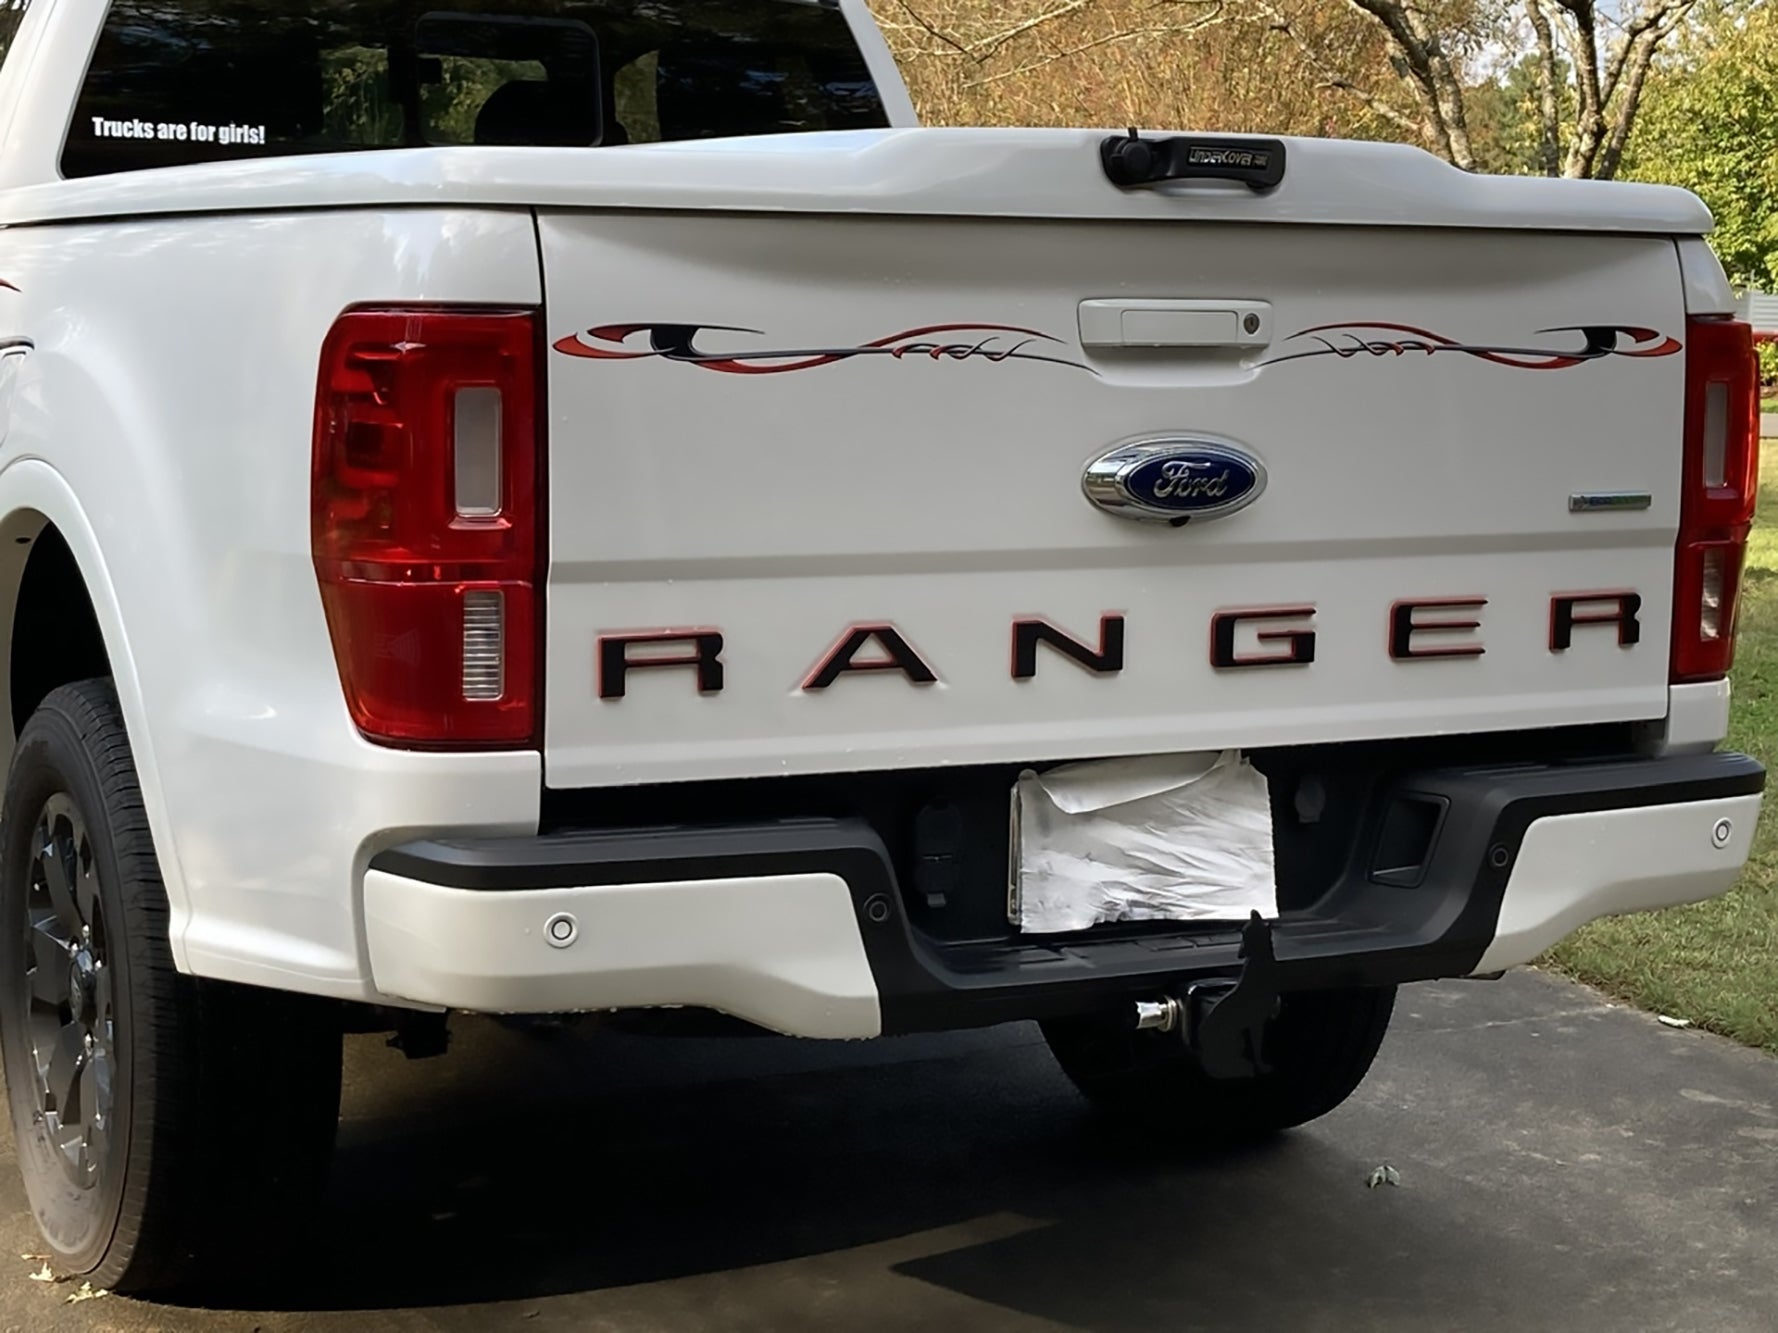 storm decals on Ford Ranger Truck Tailgate